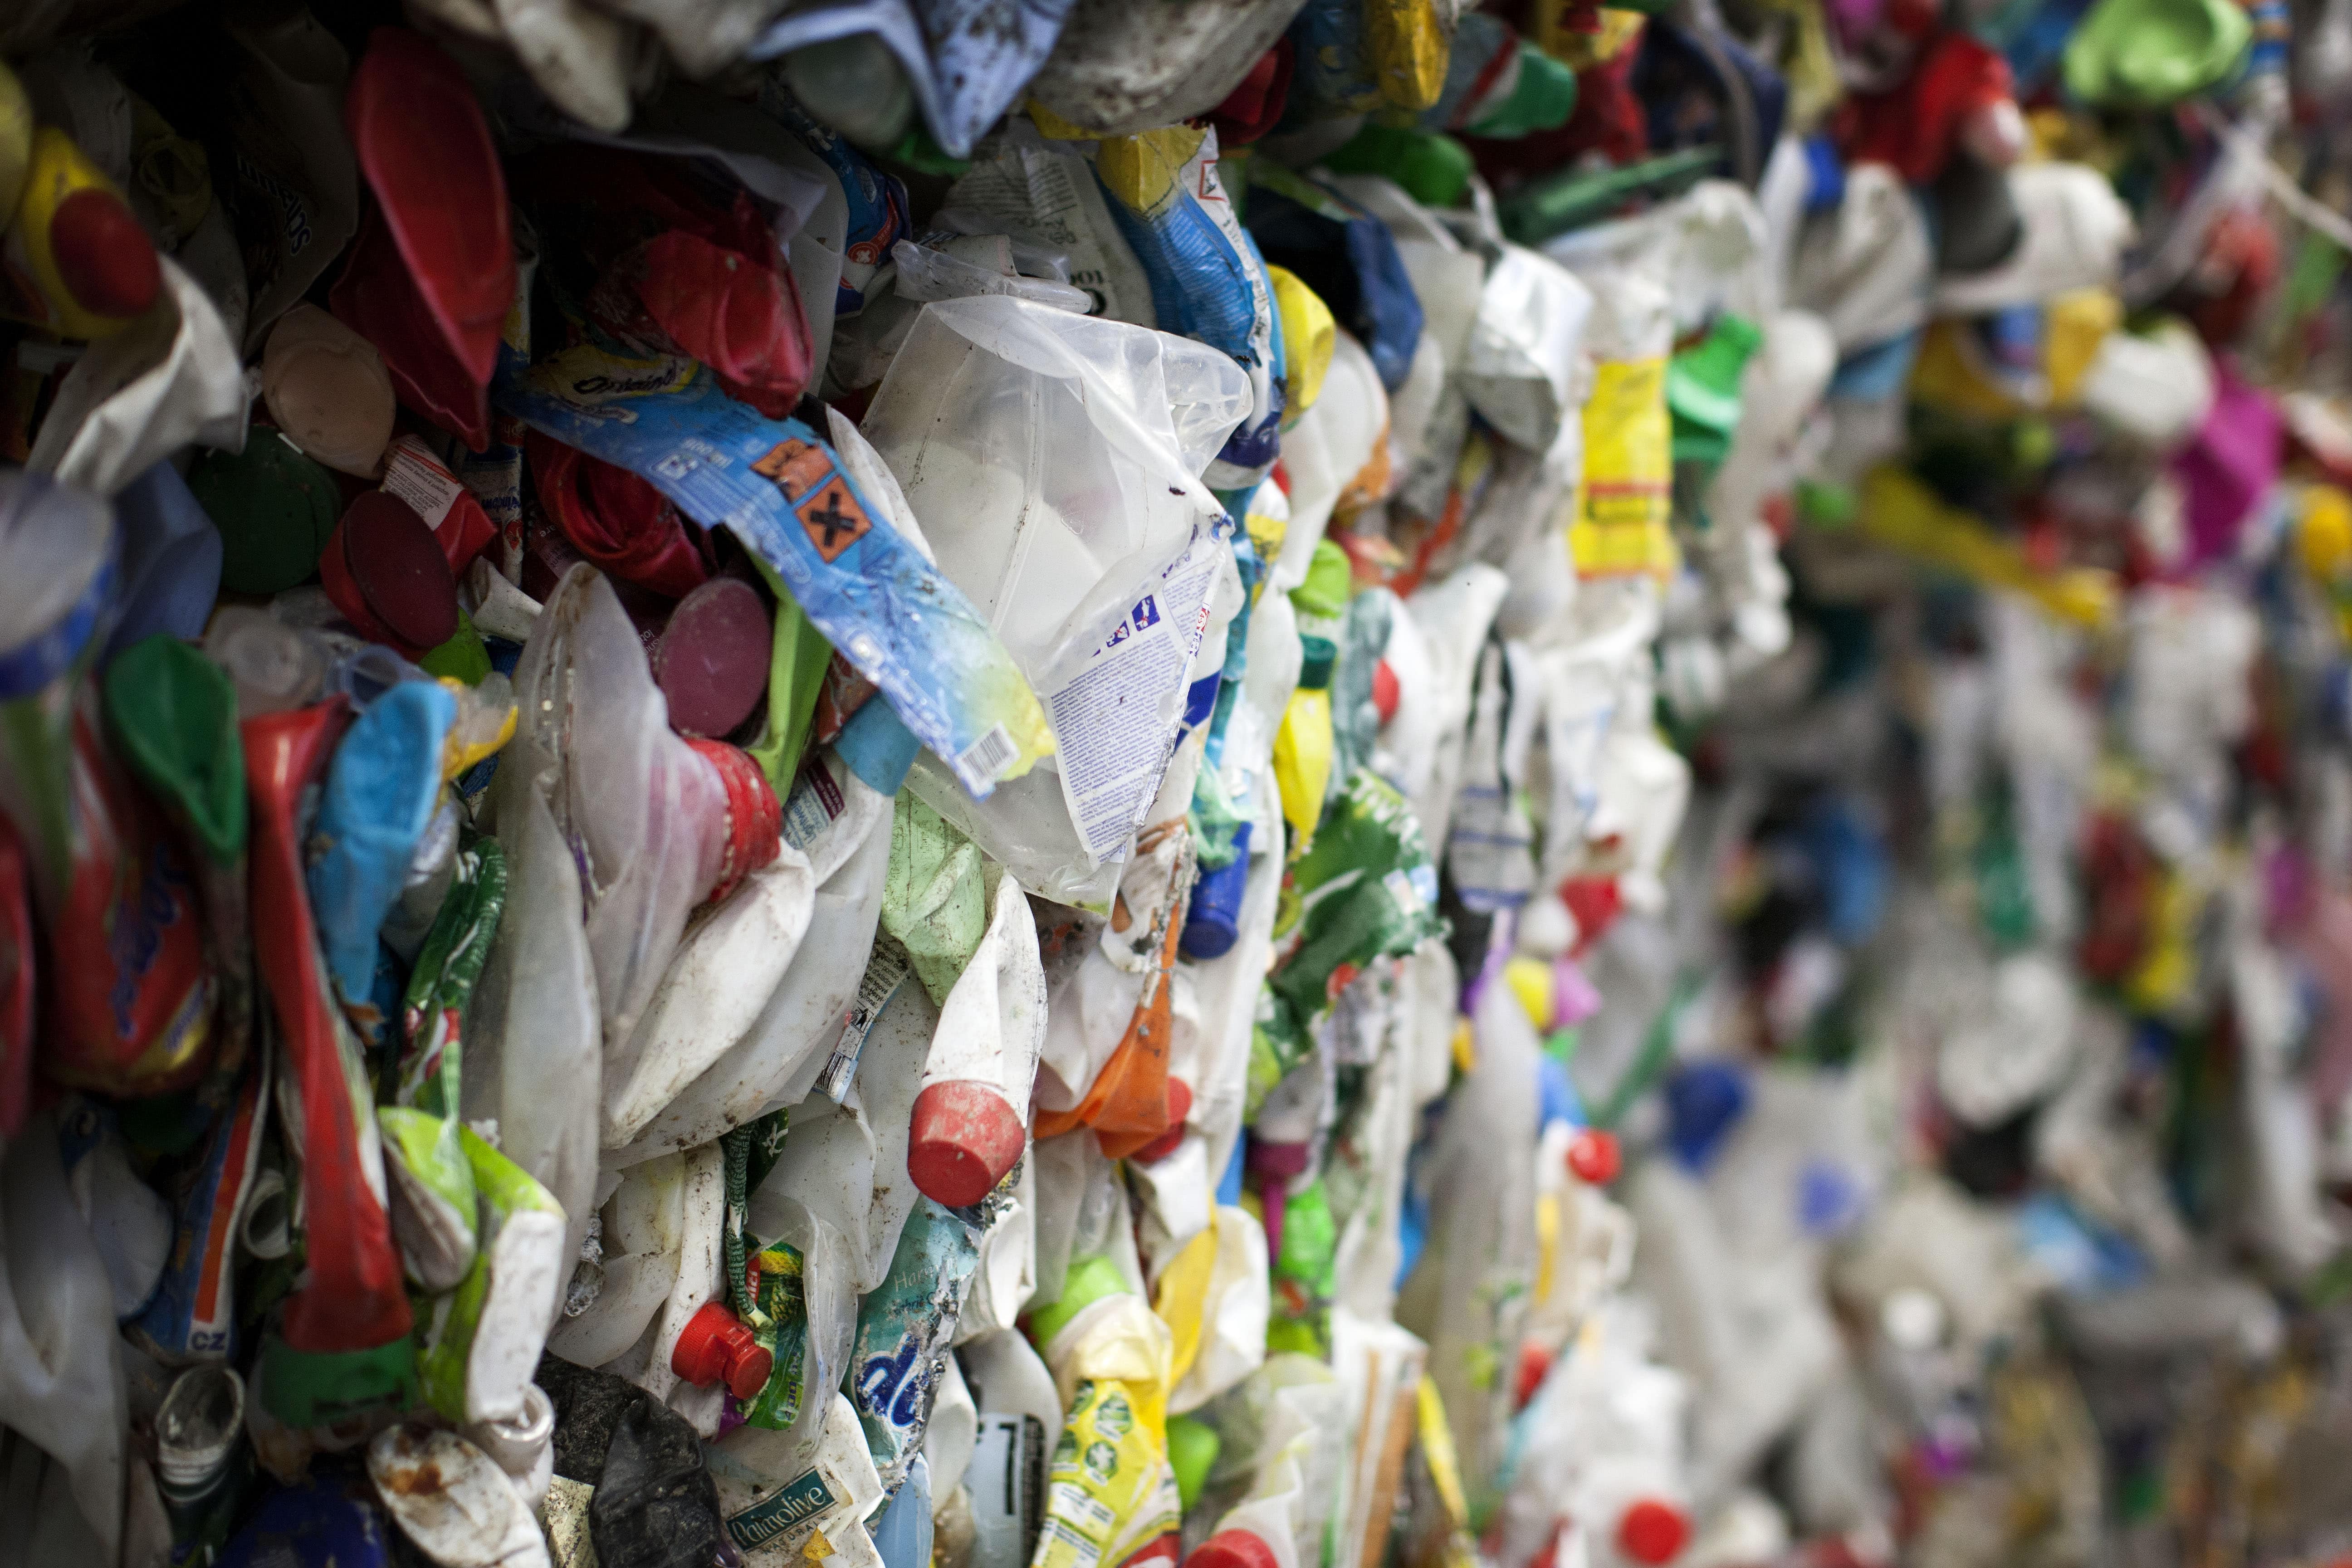 Leveraging LyondellBasell’s expertise in polymer technology and SUEZ’s capabilities in waste
                                    management, post-consumer plastics, like these bottles, are recycled into prime grade plastics at
                                    Quality Circular Polymers.